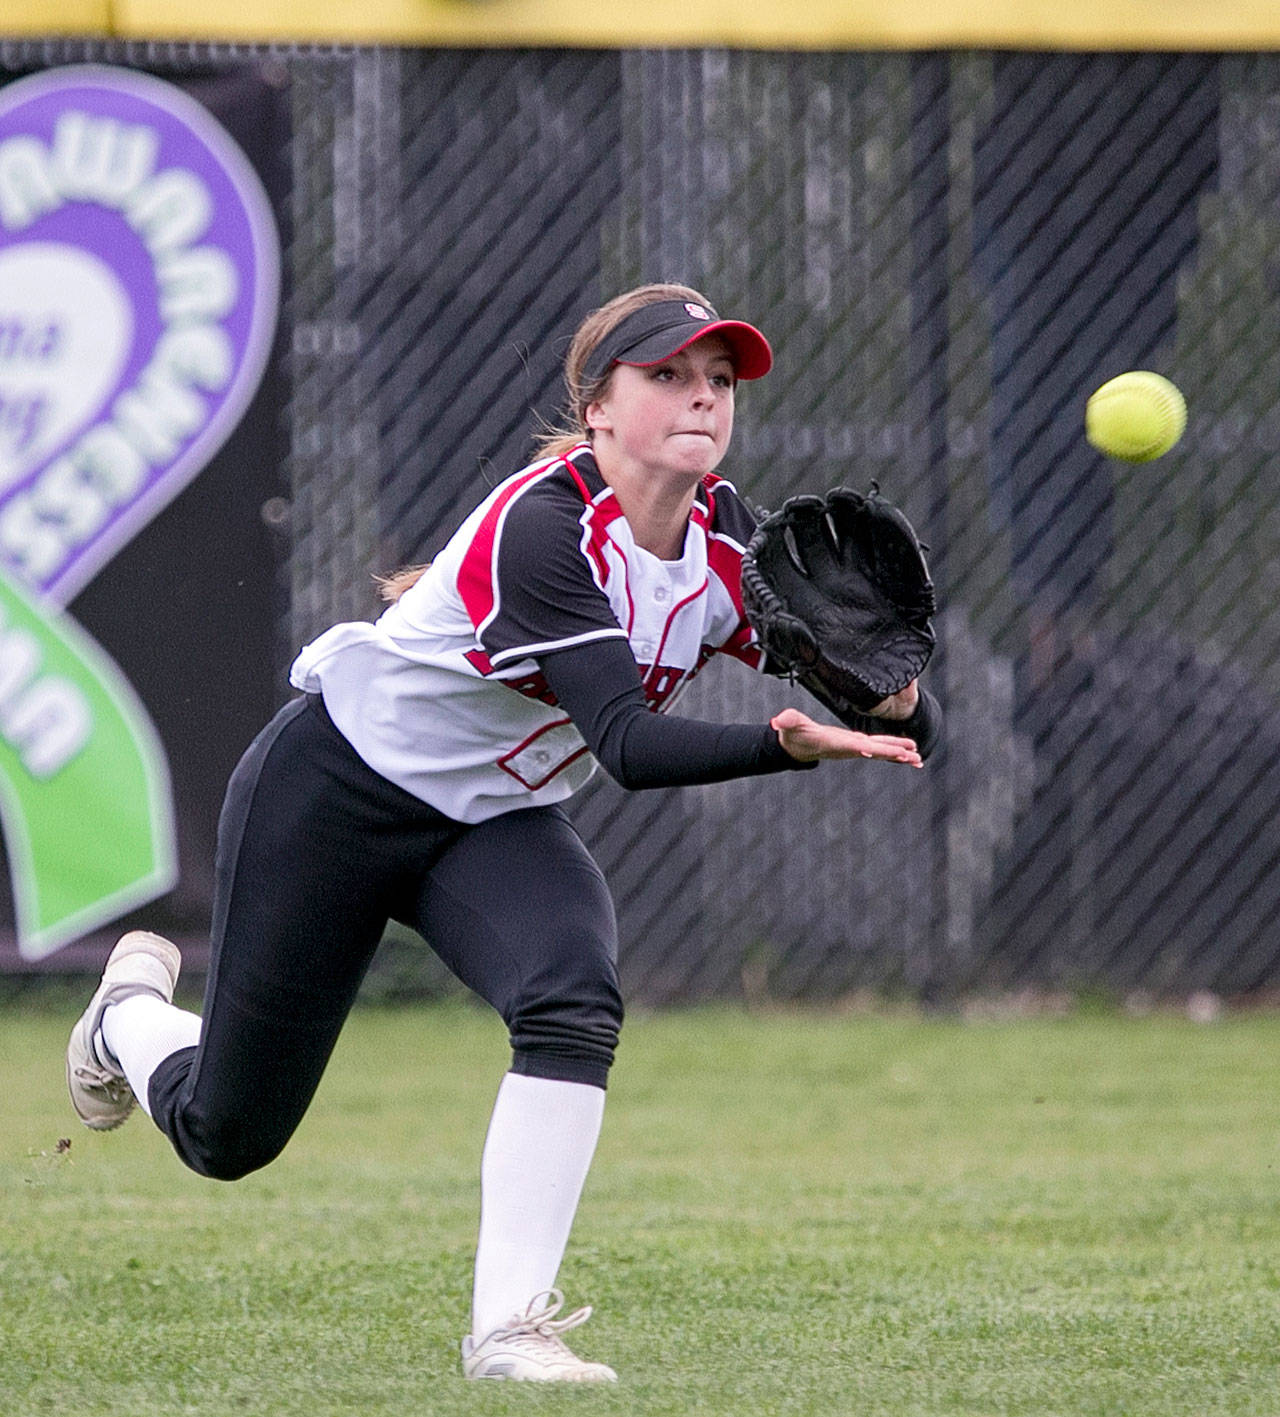 UW-bound senior Sami Reynolds of Snohomish High School makes a play in the outfield during a game in April. (Kevin Clark / The Herald)